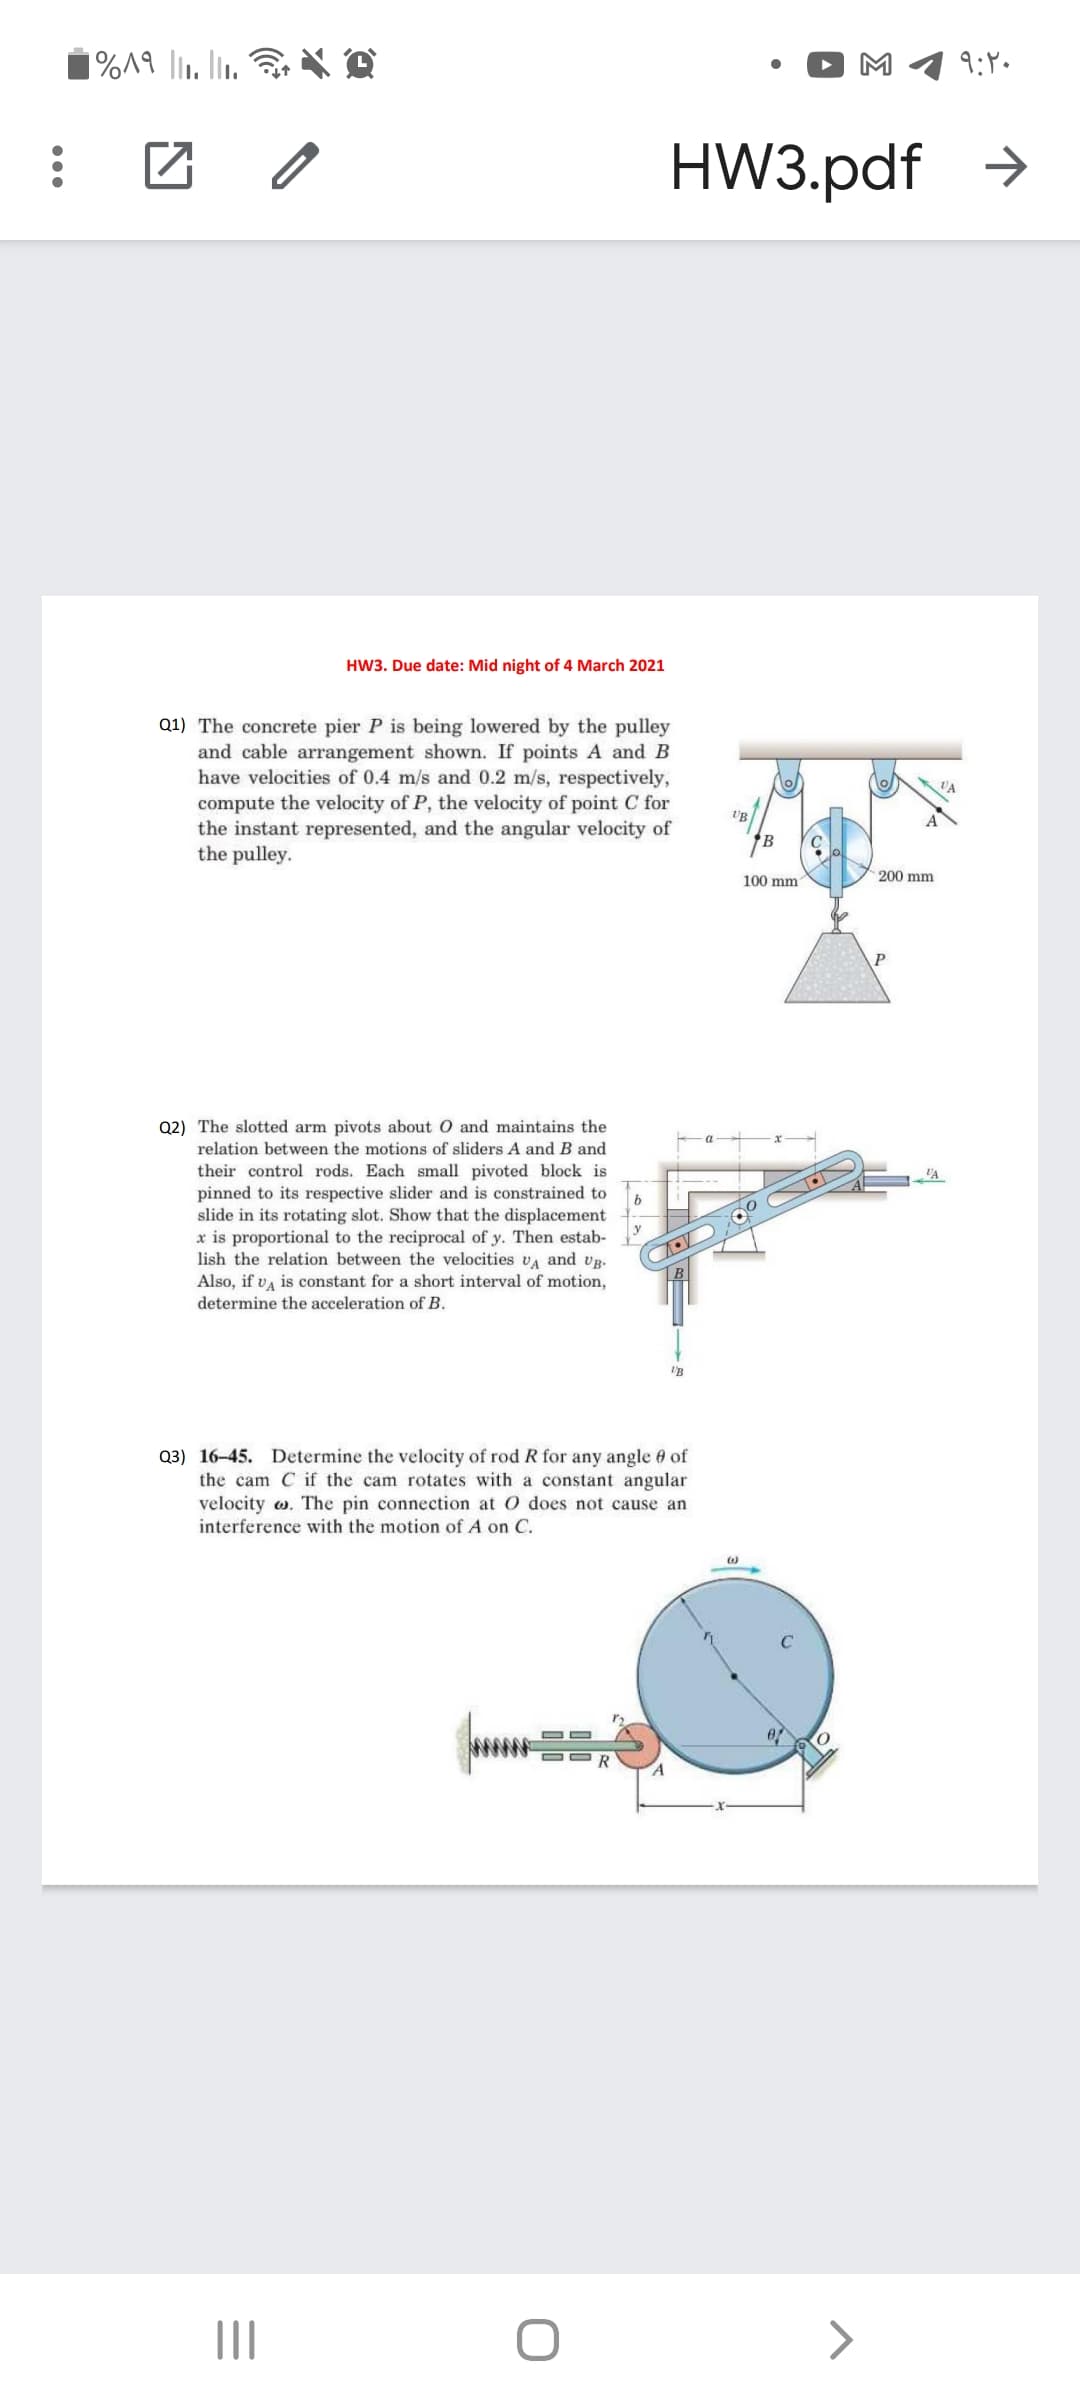 M
9:P.
HW3.pdf →
HW3. Due date: Mid night of 4 March 2021
Q1) The concrete pier P is being lowered by the pulley
and cable arrangement shown. If points A and B
have velocities of 0.4 m/s and 0.2 m/s, respectively,
compute the velocity of P, the velocity of point C for
the instant represented, and the angular velocity of
the pulley.
'B
100 mm
200 mm
Q2) The slotted arm pivots about O and maintains the
relation between the motions of sliders A and B and
their control rods. Each small pivoted block is
pinned to its respective slider and is constrained to
b
slide in its rotating slot. Show that the displacement
x is proportional to the reciprocal of y. Then estab-
lish the relation between the velocities VA and vg.
Also, if v, is constant for a short interval of motion,
determine the acceleration of B.
Q3) 16-45. Determine the velocity of rod R for any angle e of
the cam C if the cam rotates with a constant angular
velocity w. The pin connection at O does not cause an
interference with the motion of A on C.
II
>
